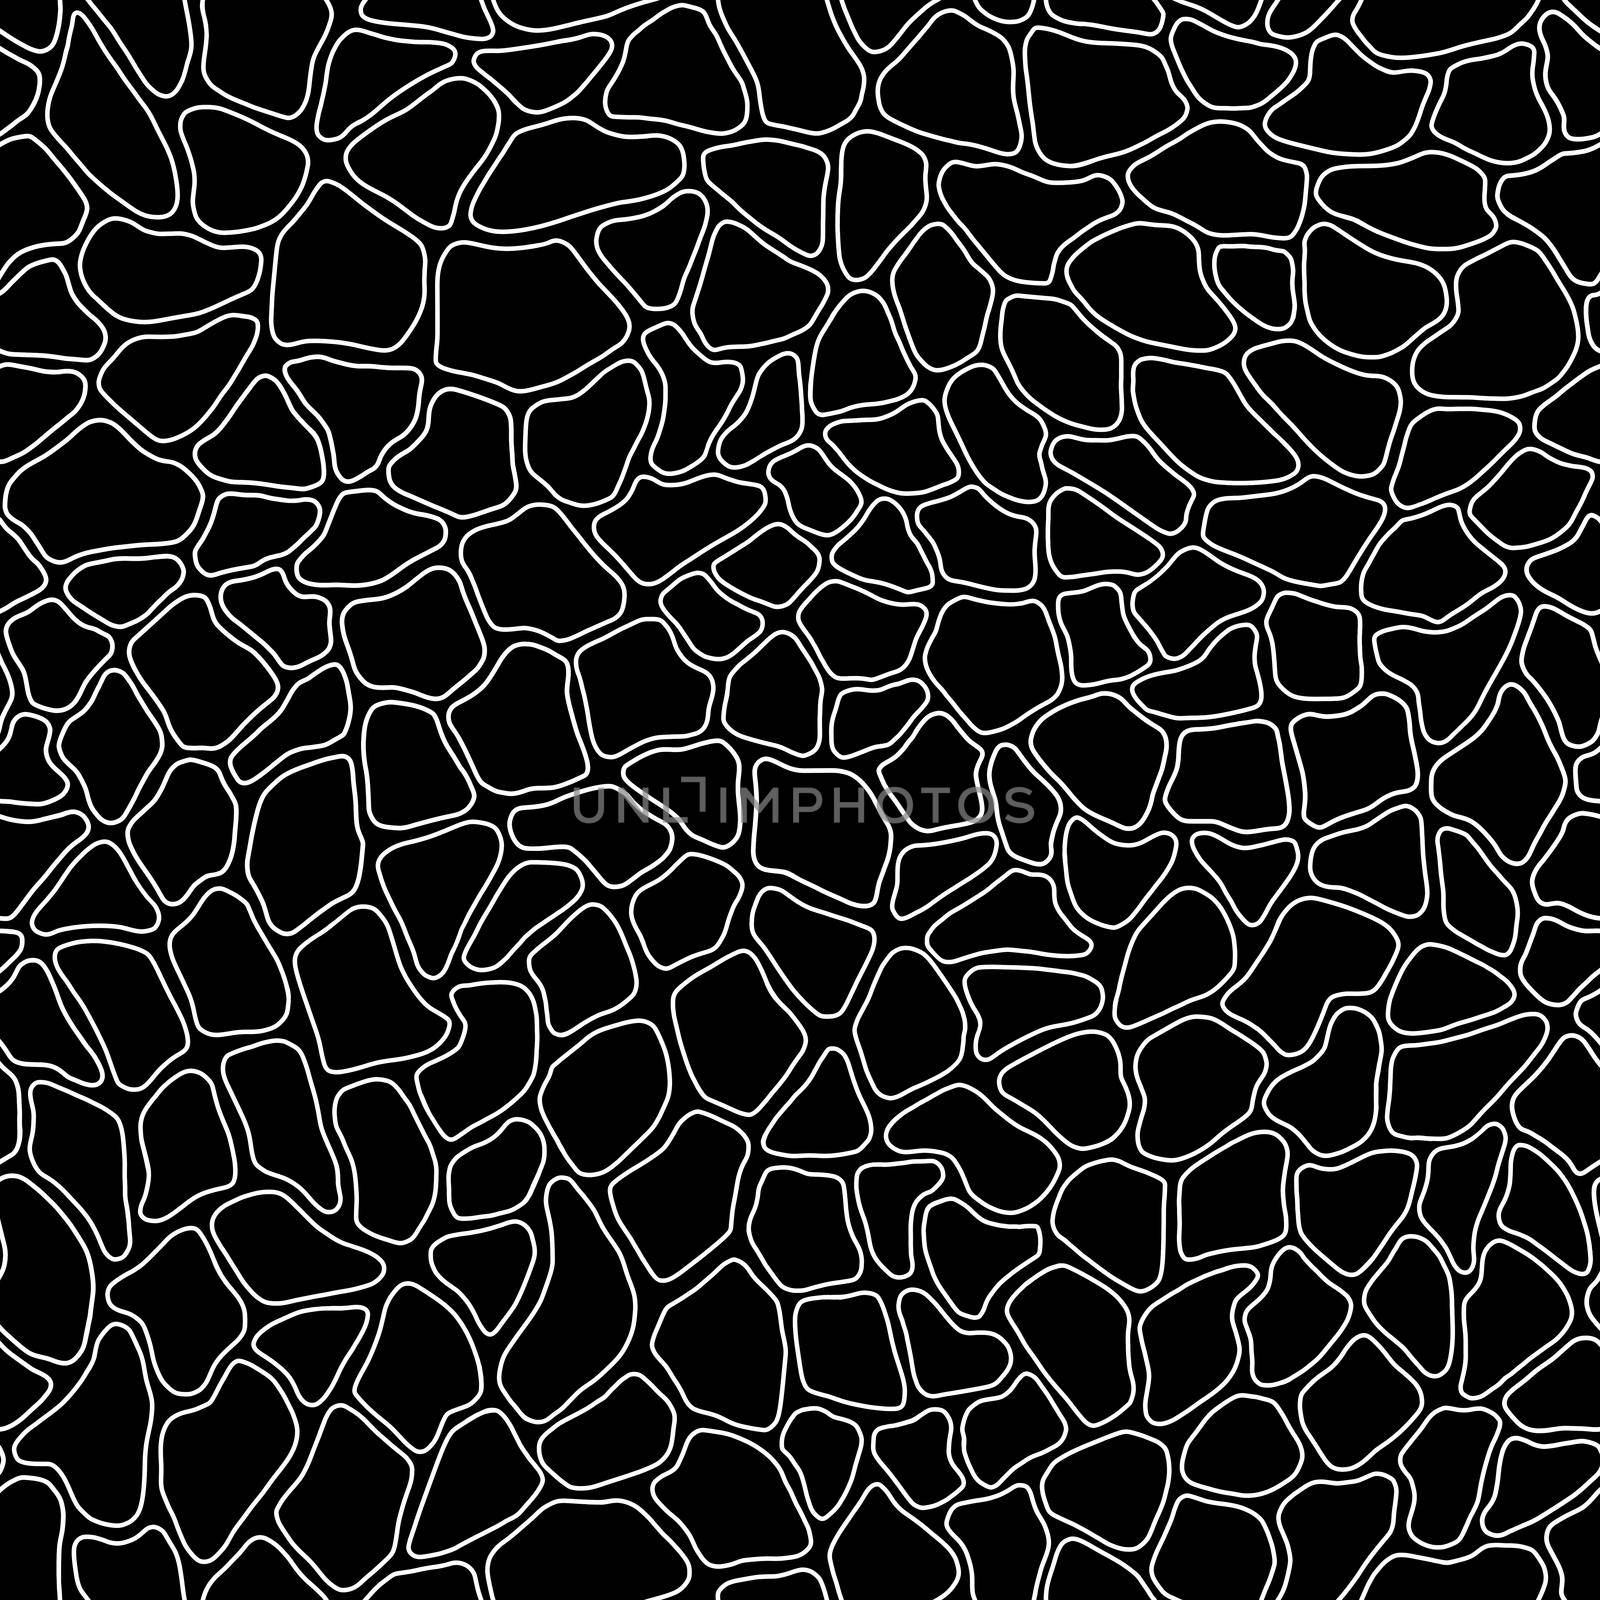 Terrazzo modern trendy colorful seamless pattern.Abstract creative backdrop with chaotic small pieces irregular shapes. Ideal for wrapping paper,textile,print,wallpaper,terrazzo flooring.White black